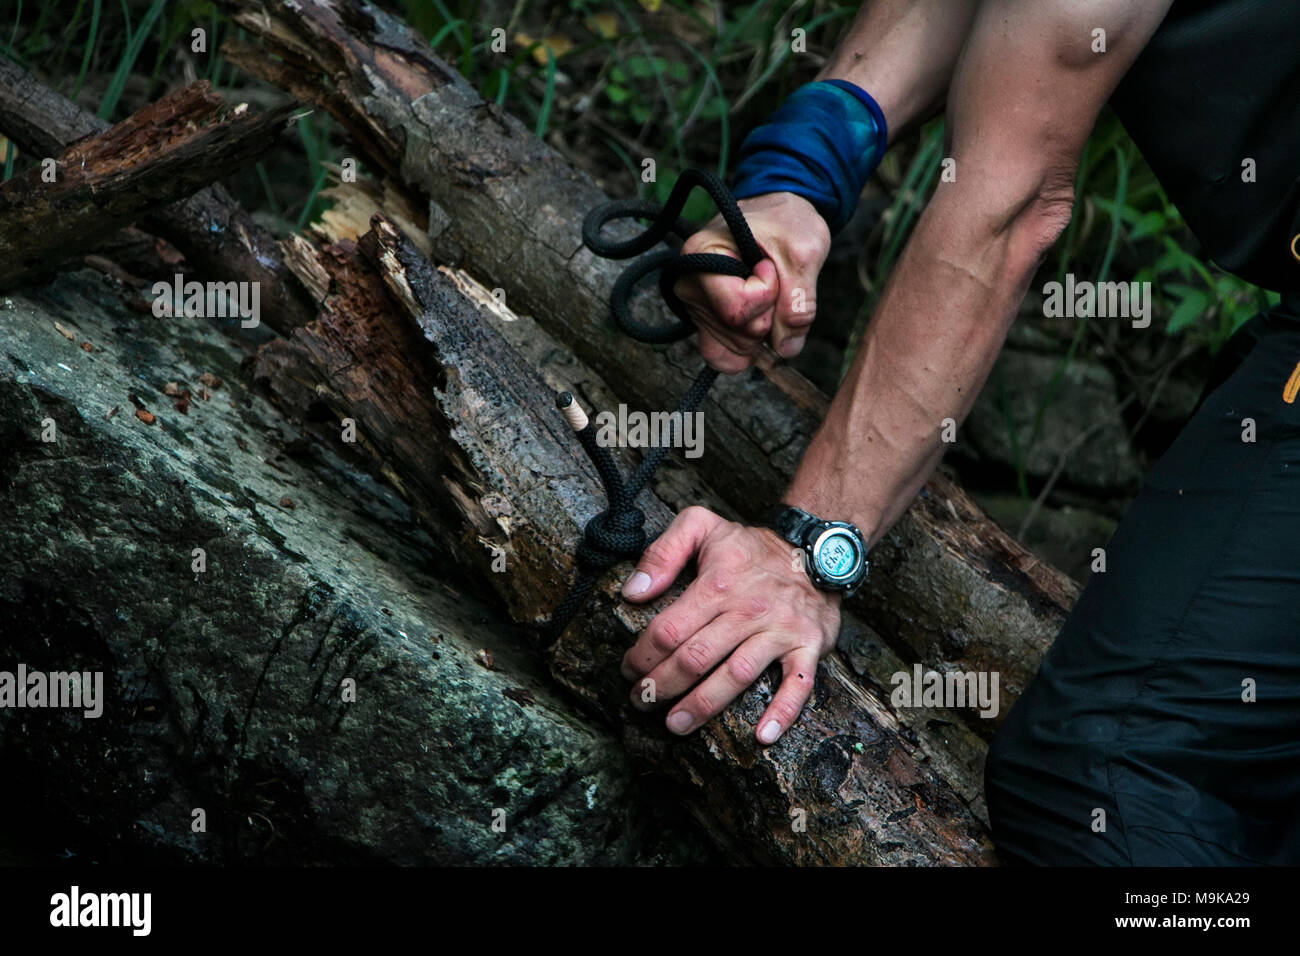 A closeup of man's hands tying a rope over logs to create a raft. Concept of being strong and creative in survival situations in the wilderness. Stock Photo